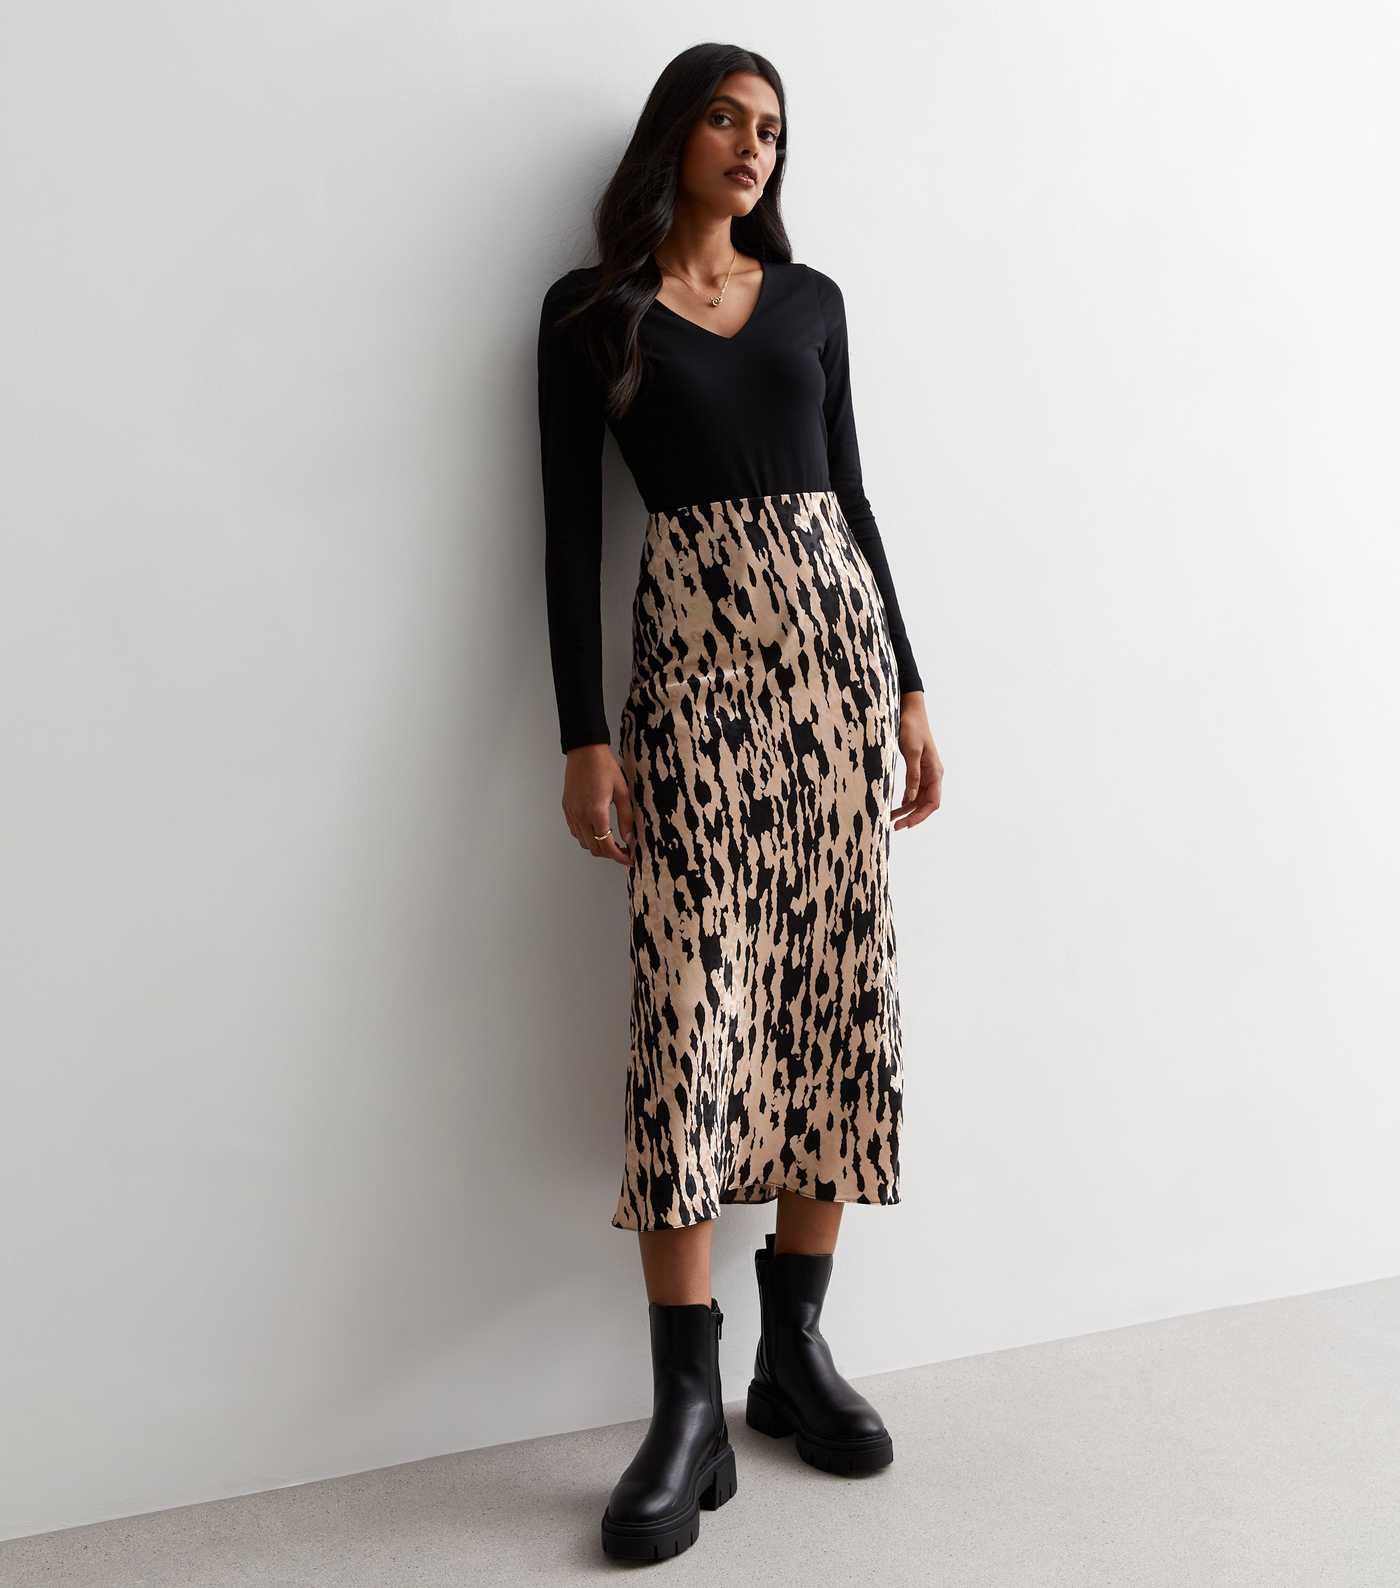 Black Animal Print Satin Midaxi Skirt
						
						Add to Saved Items
						Remove from Saved Ite... | New Look (UK)